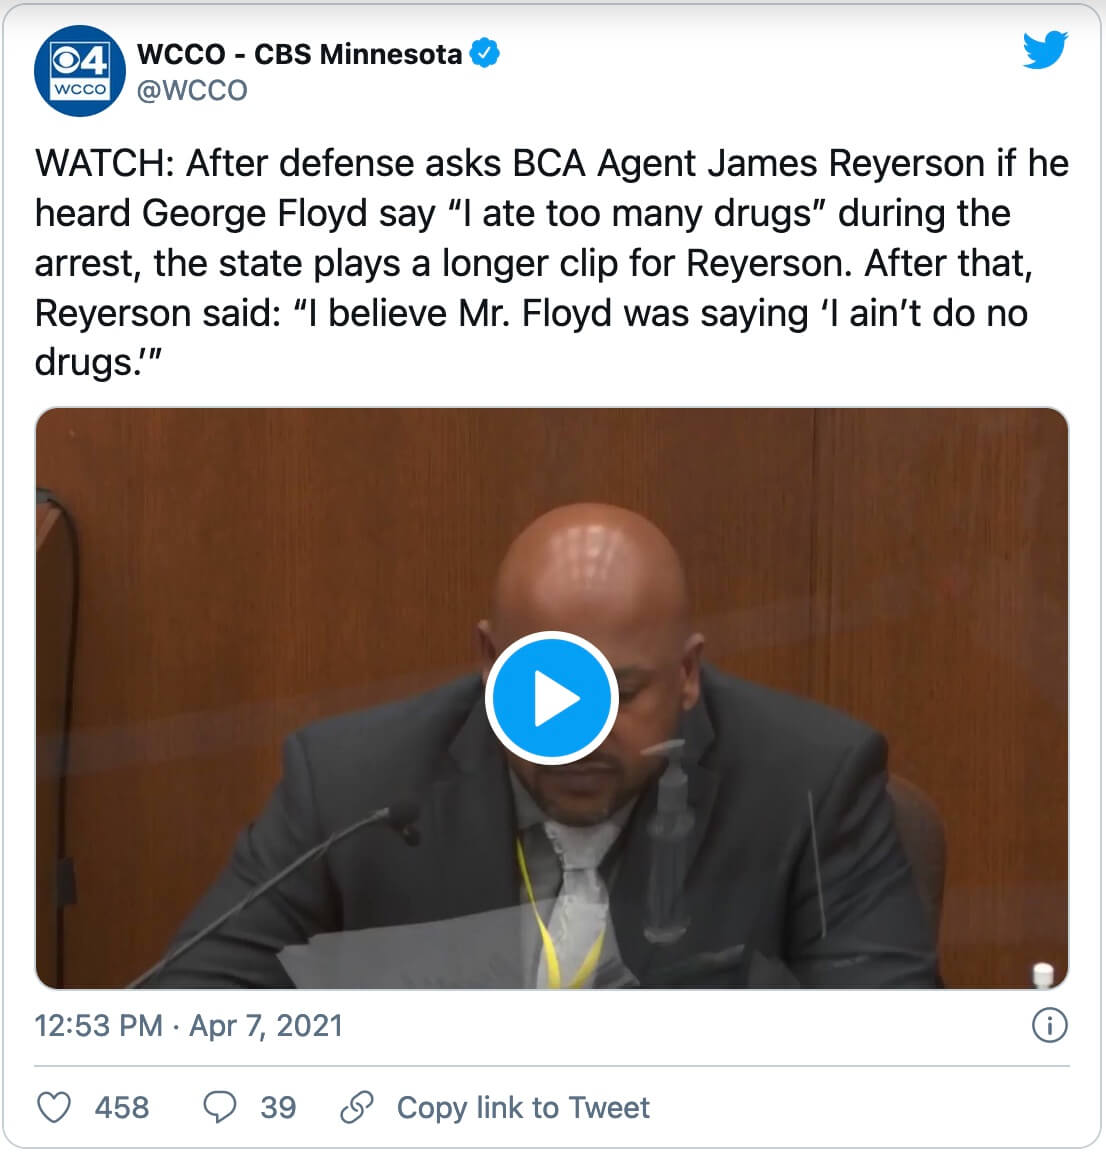 WATCH: After defense asks BCA Agent James Reyerson if he heard George Floyd say “I ate too many drugs” during the arrest, the state plays a longer clip for Reyerson. After that, Reyerson said: “I believe Mr. Floyd was saying ‘I ain’t do no drugs.’” pic.twitter.com/gzcVbErL9W — WCCO - CBS Minnesota (@WCCO) April 7, 2021